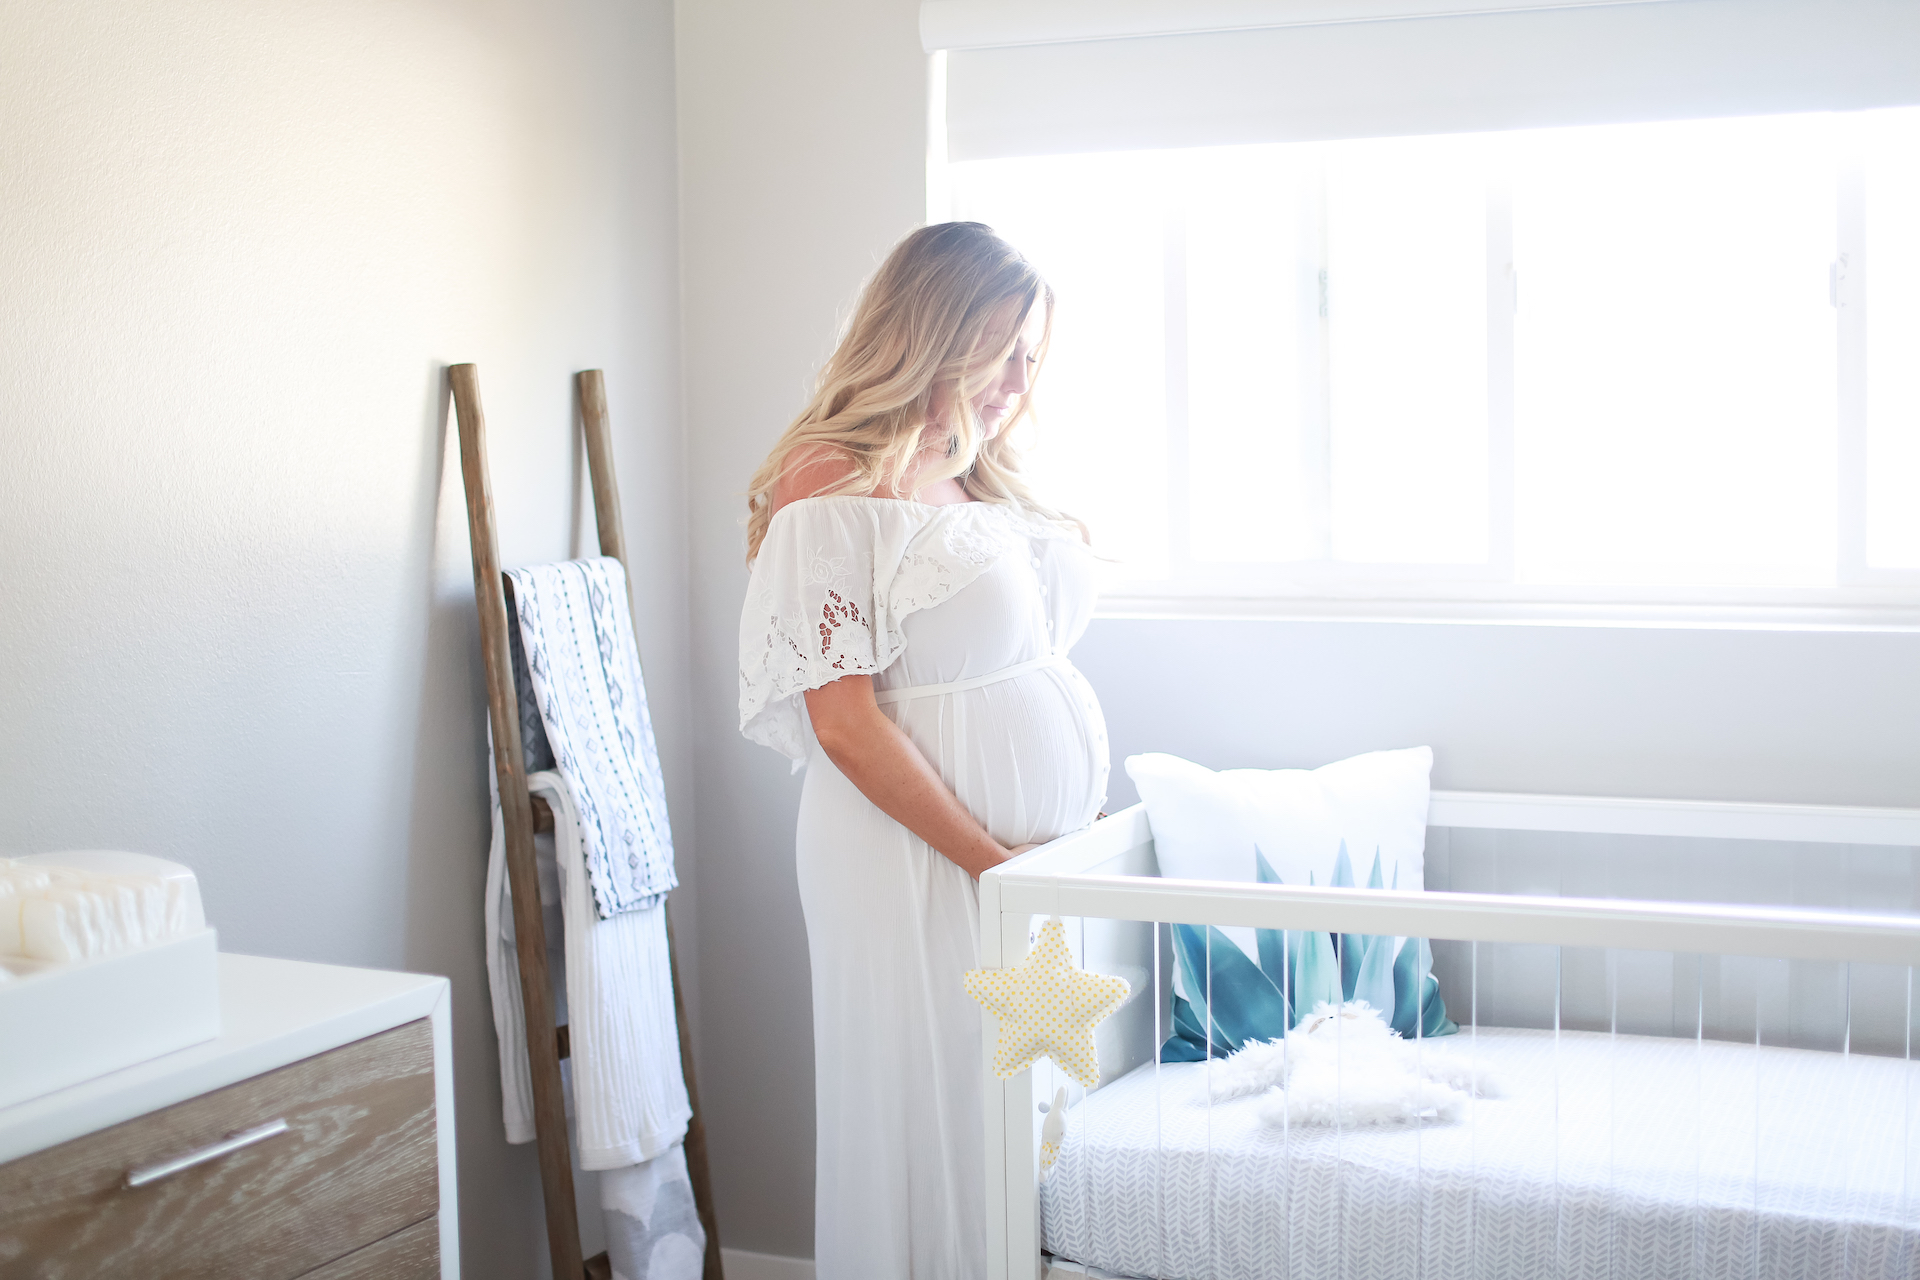 Mother via egg donation Victoria shares a heartfelt letter to future or new DEIVF mothers in this blog.